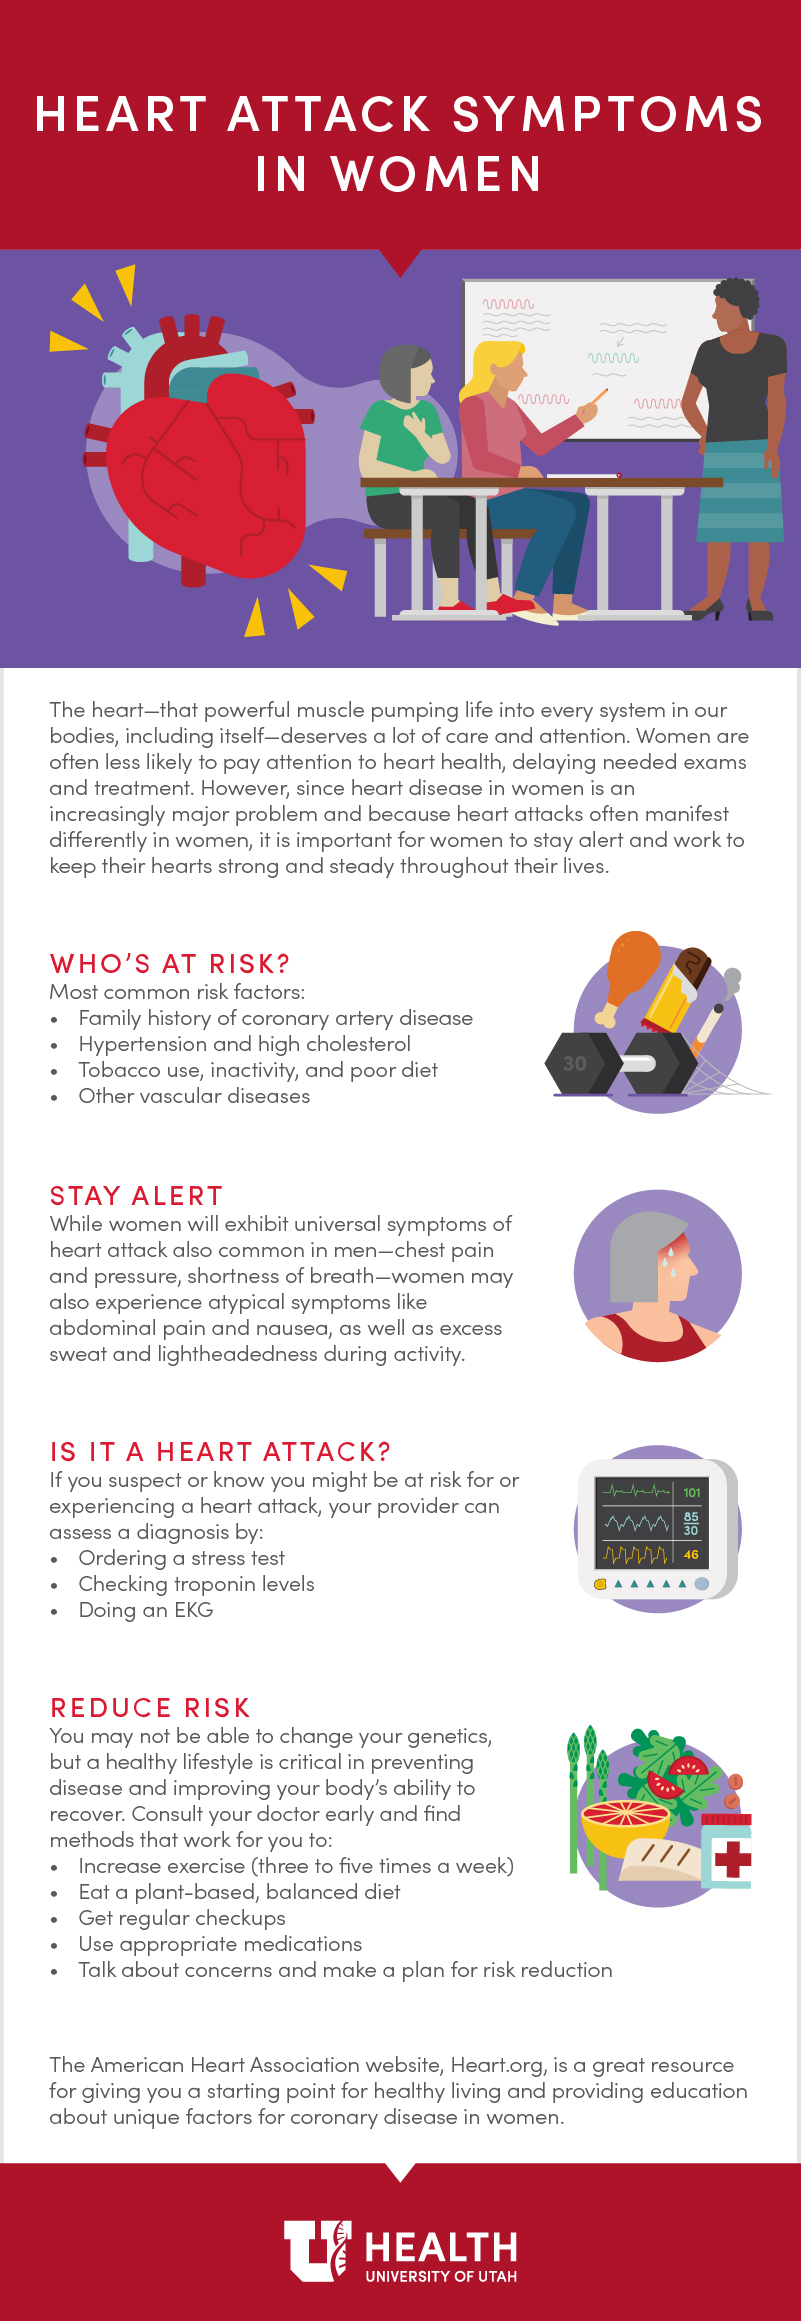 heart attack symptoms infographic